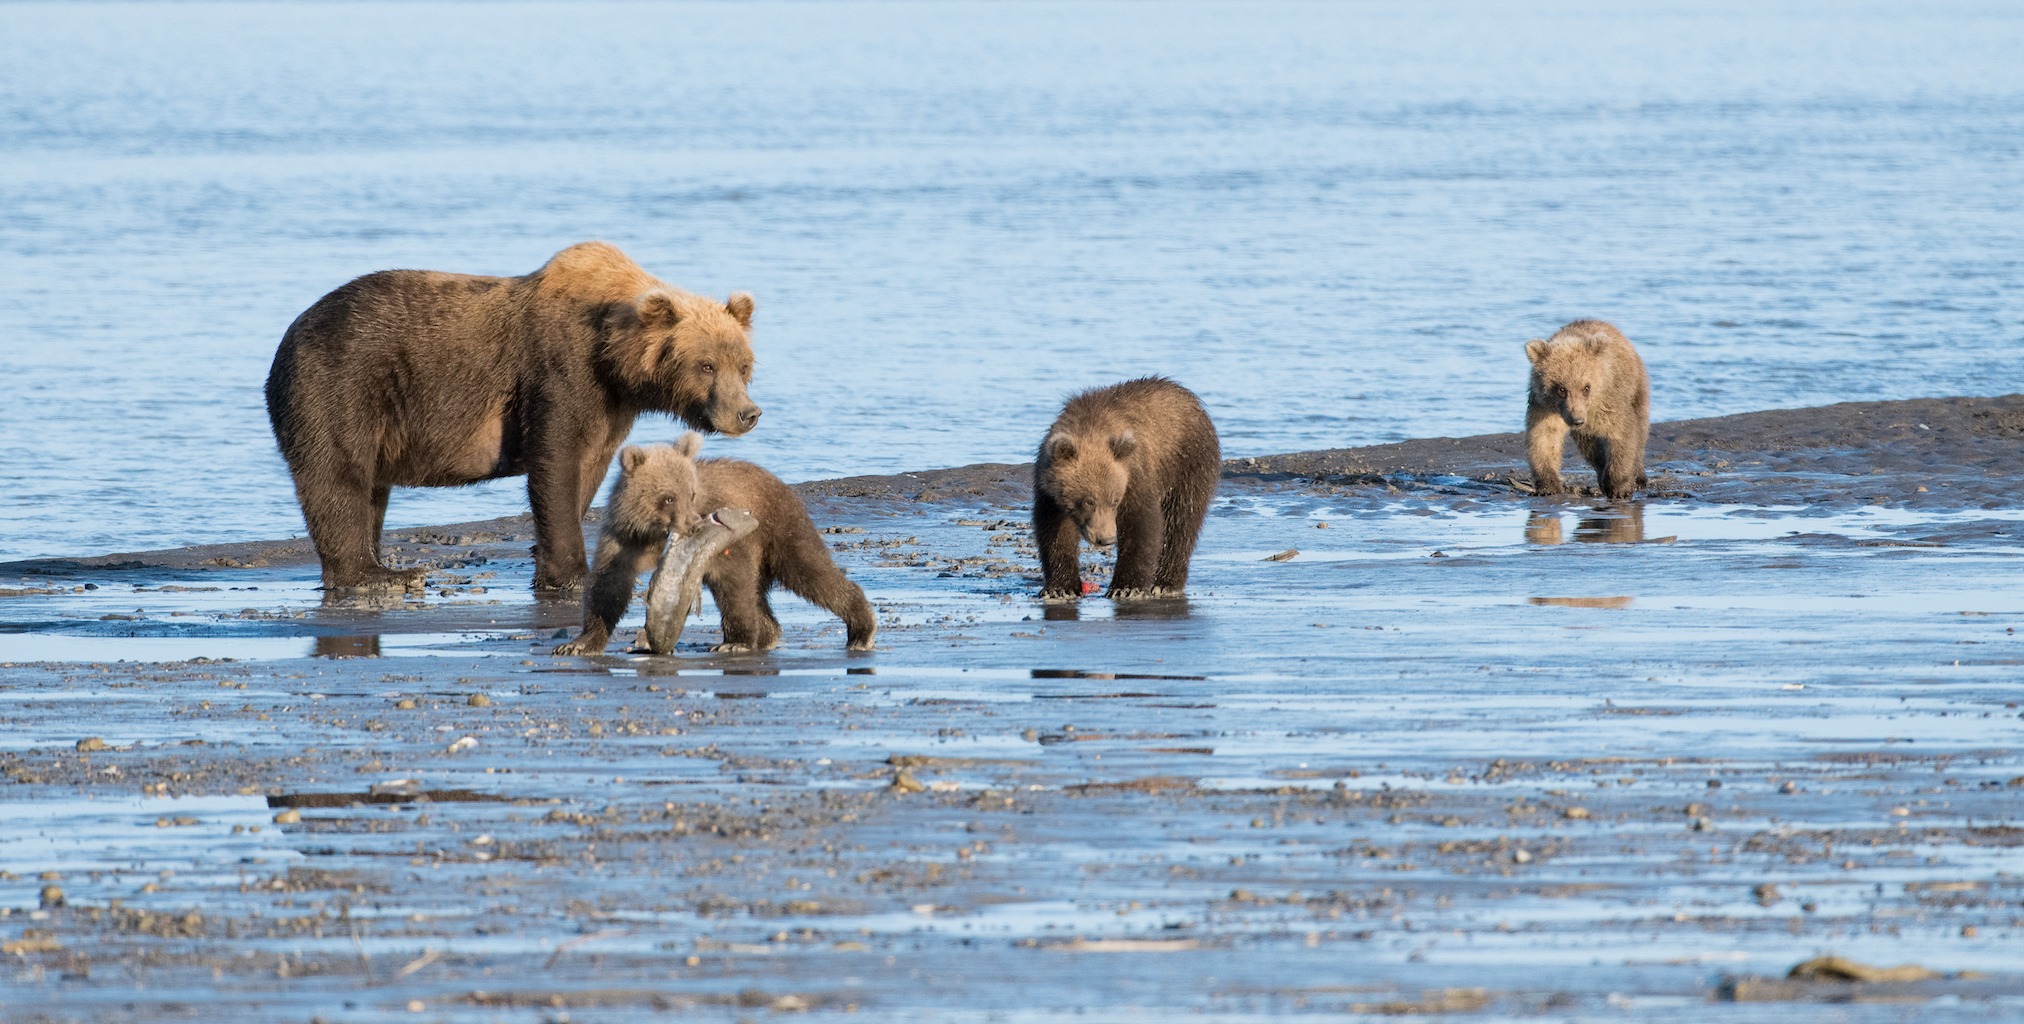 Mother brown bear with three cubs walking along beach. One cub has dead fish hanging from its mouth